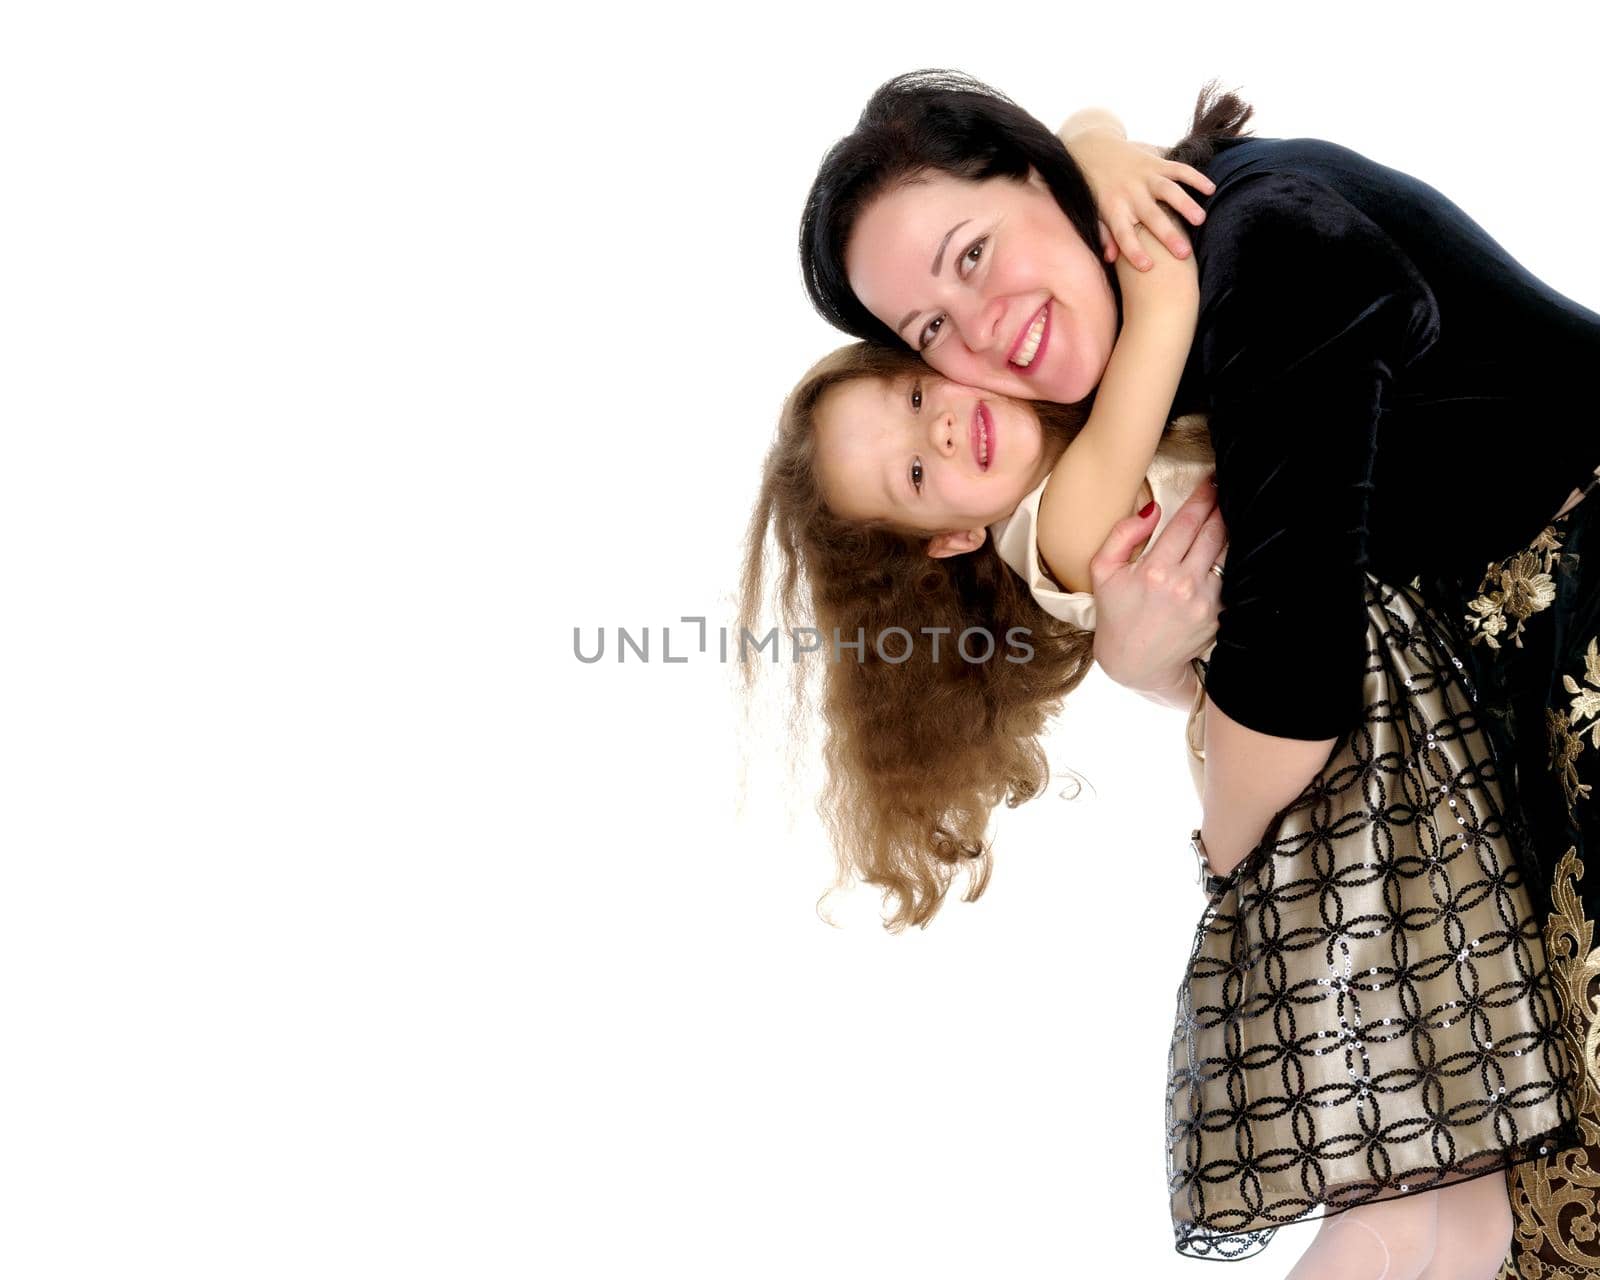 mother and little daughter gently embrace by kolesnikov_studio